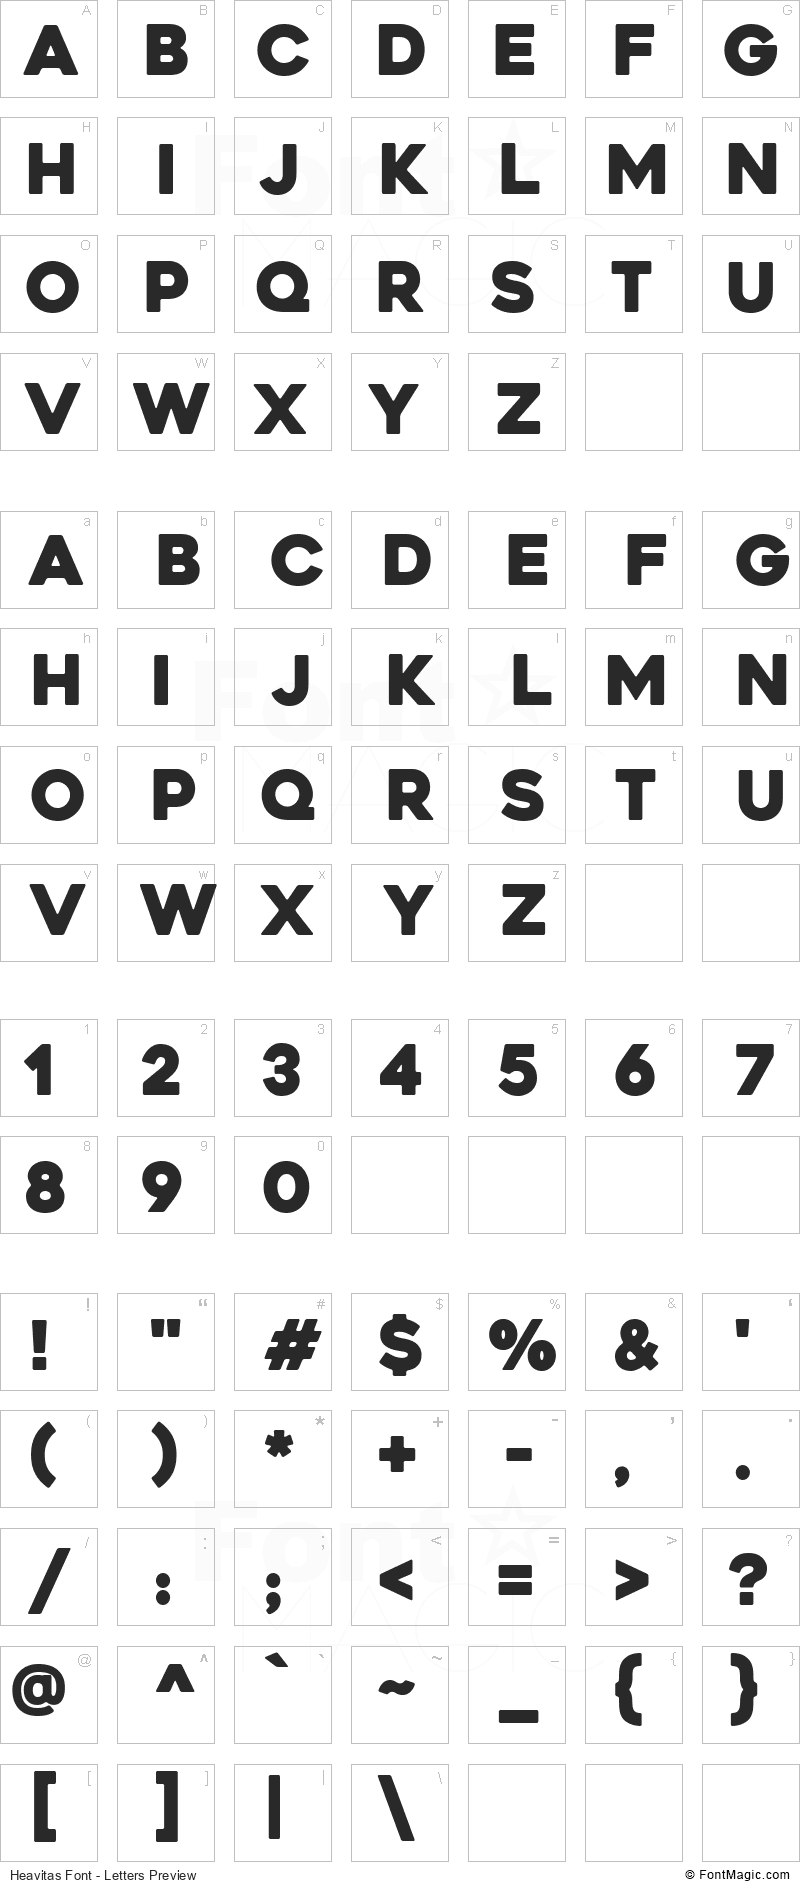 Heavitas Font - All Latters Preview Chart